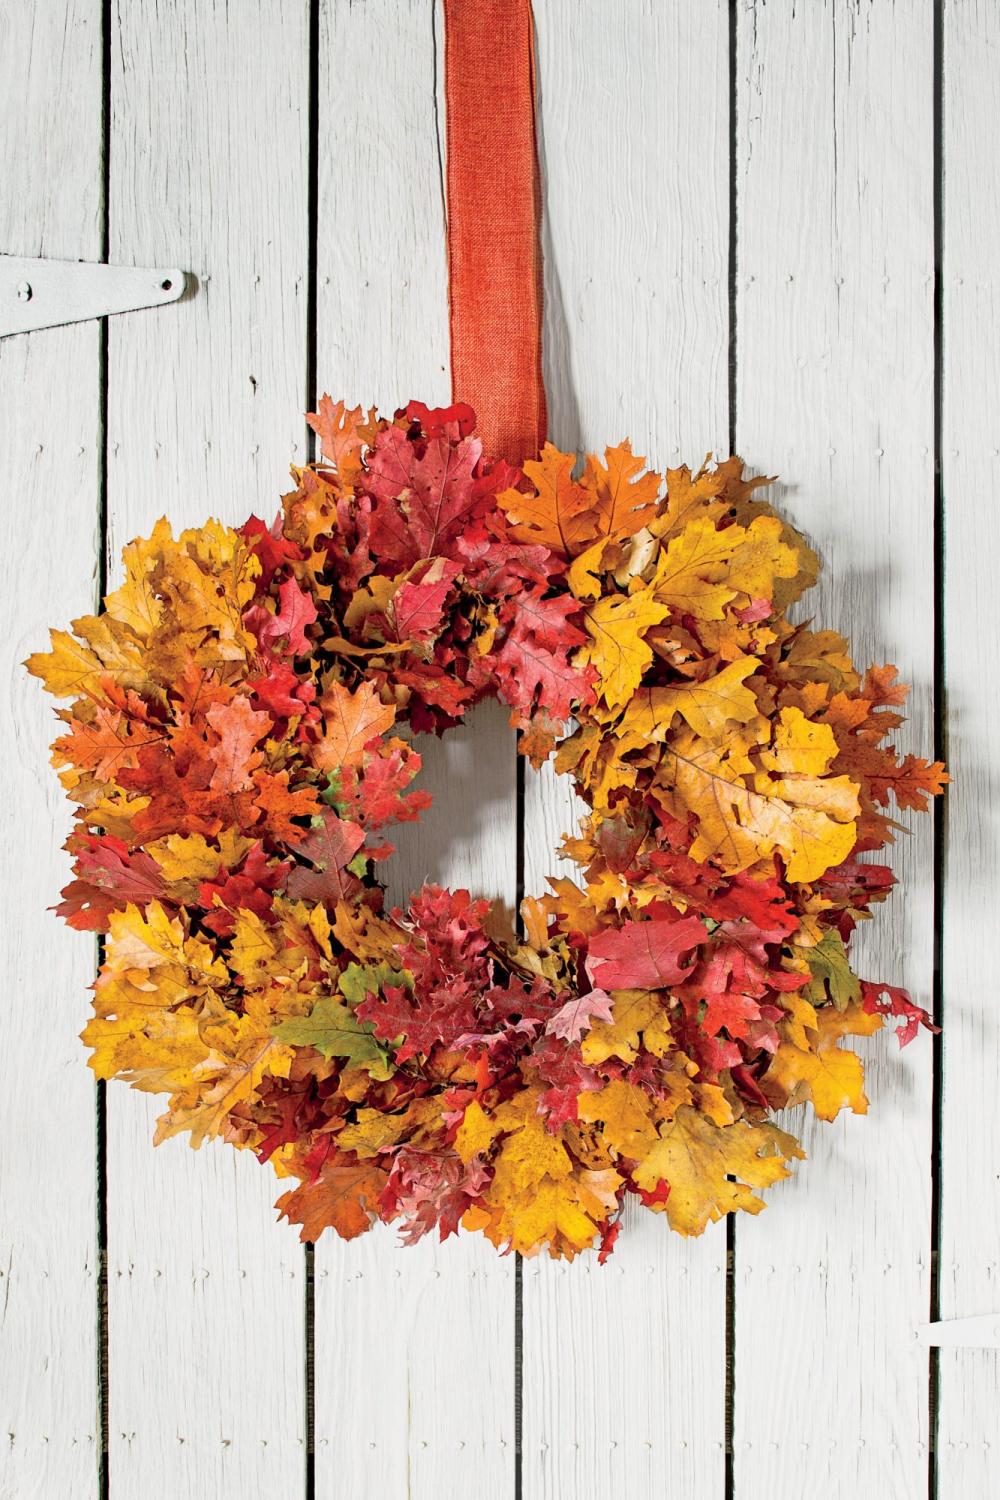 Fall wreath with colorful foliage thanksgiving door decor